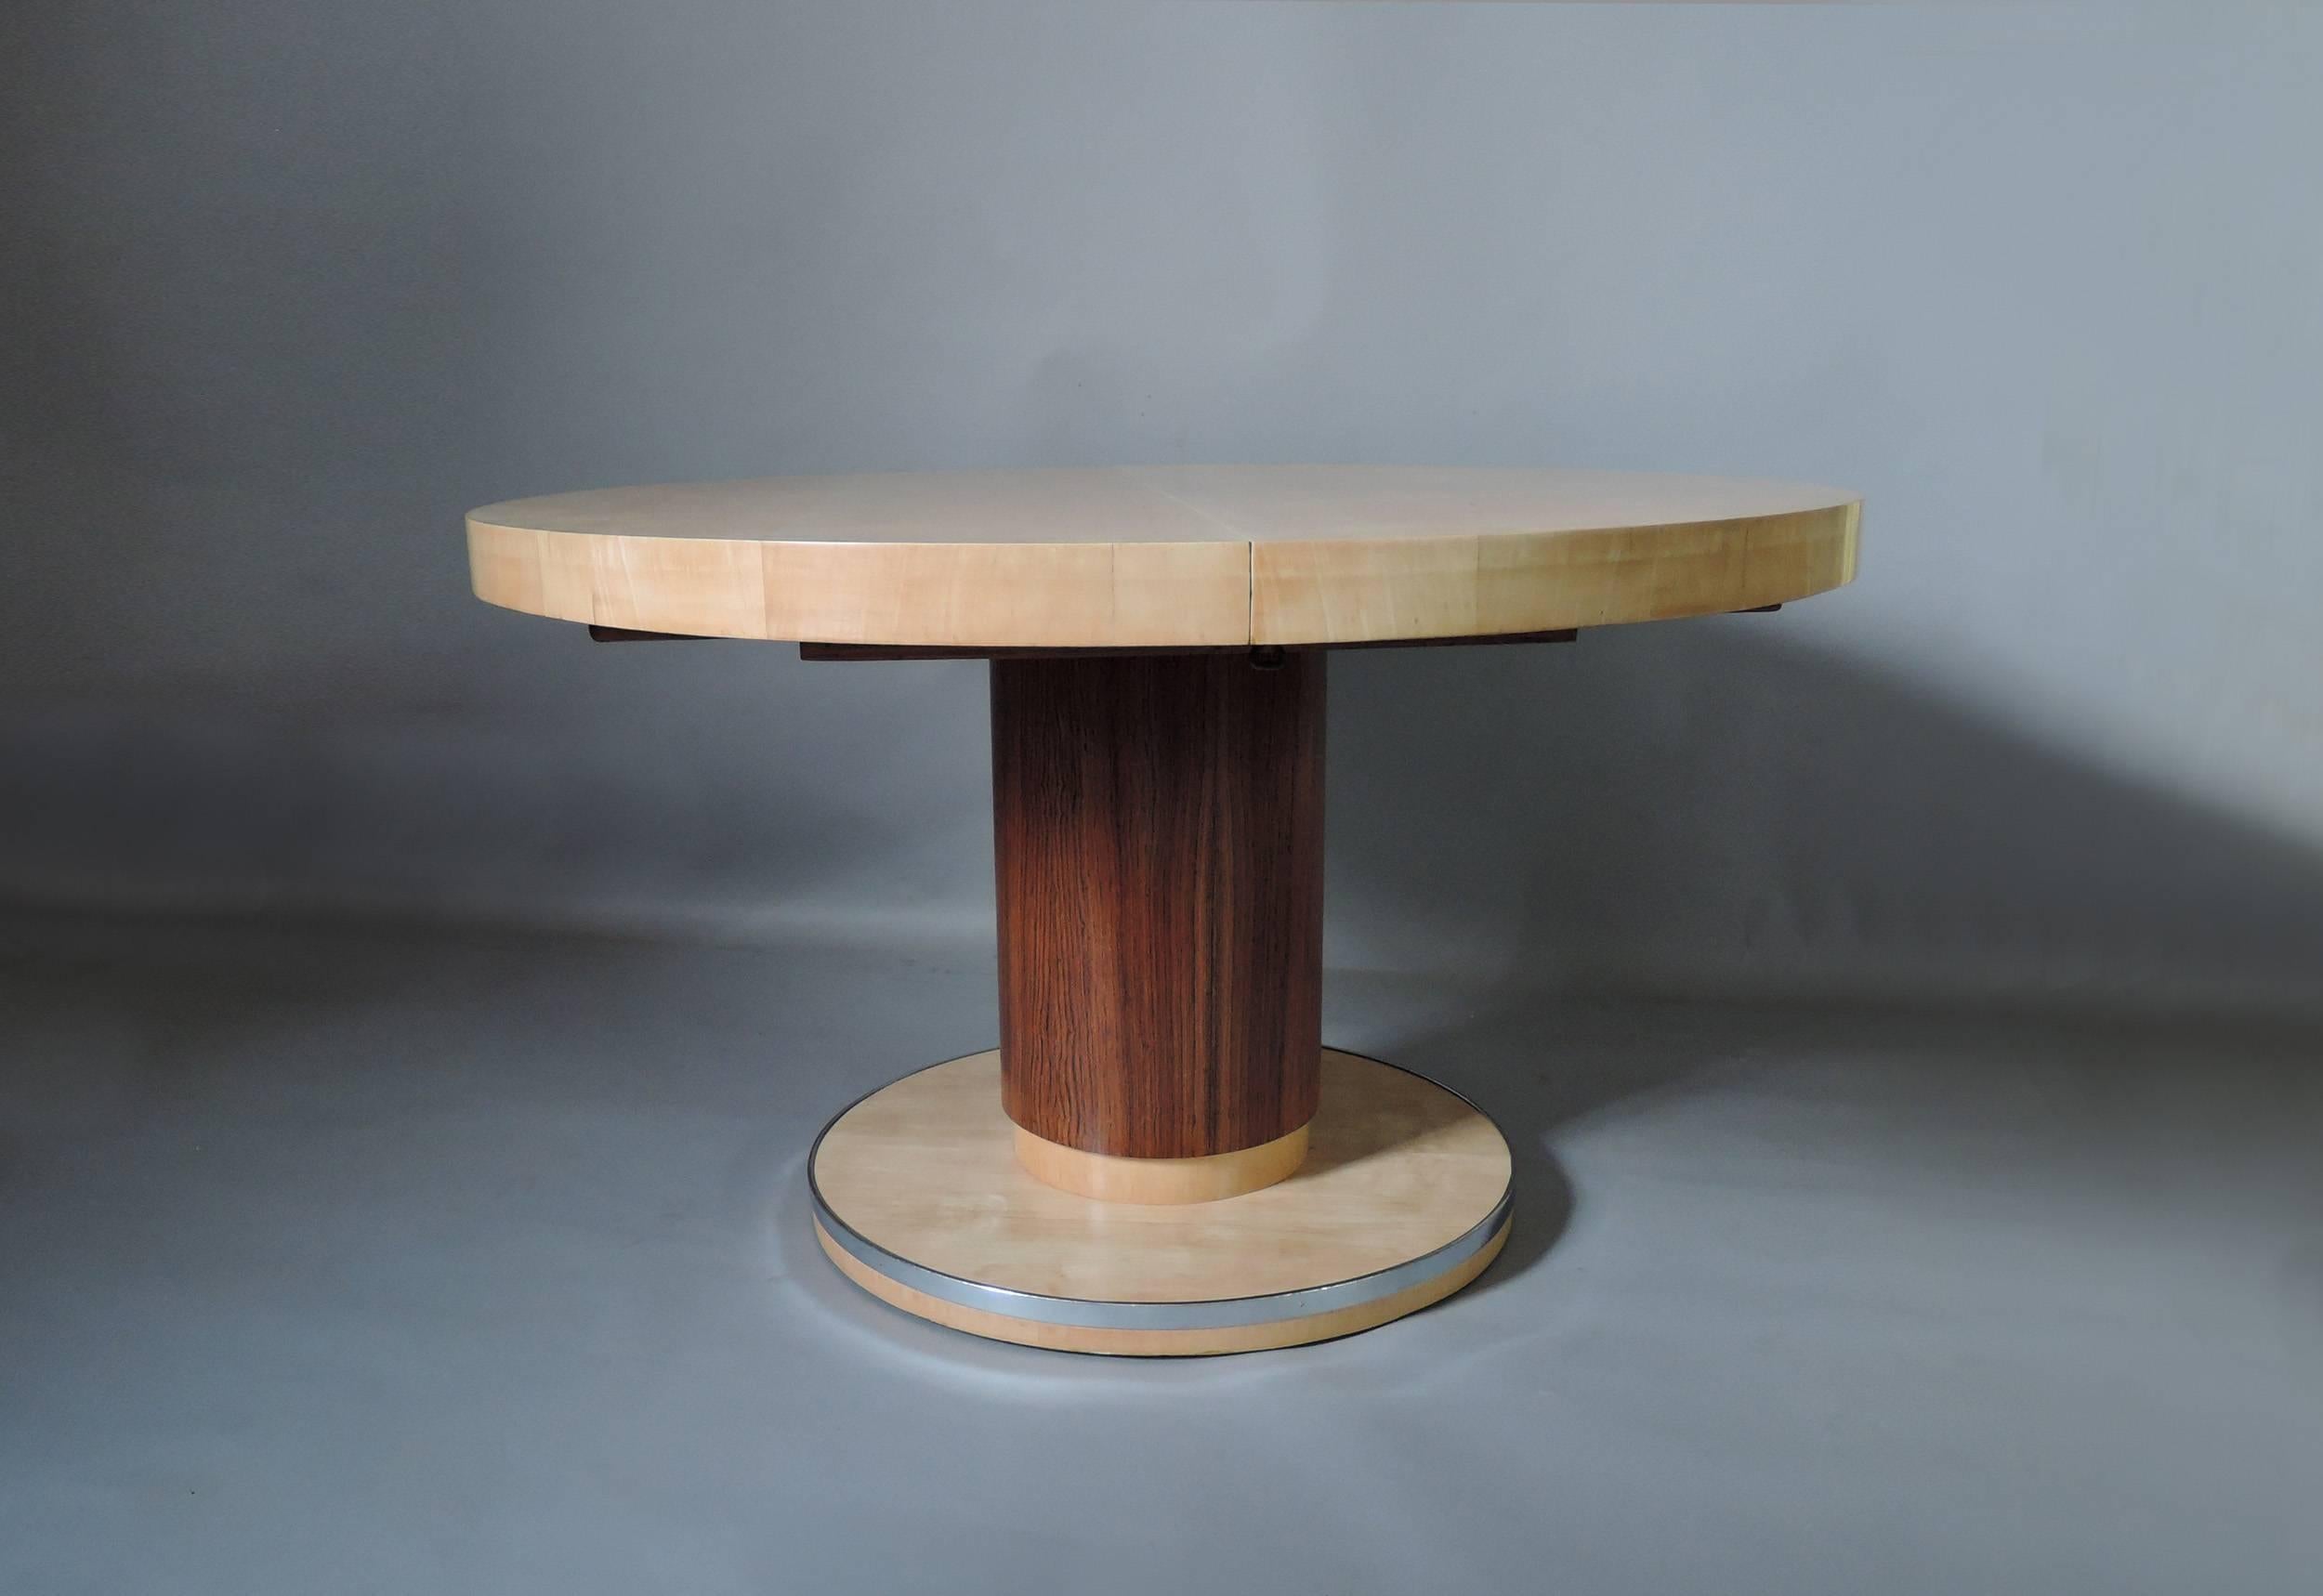 A fine Belgian Art Deco round dining table with a sycamore top and rosewood and sycamore pedestal base with a chrome edge.
Possibility of center leaves (to be made), full length would be 94